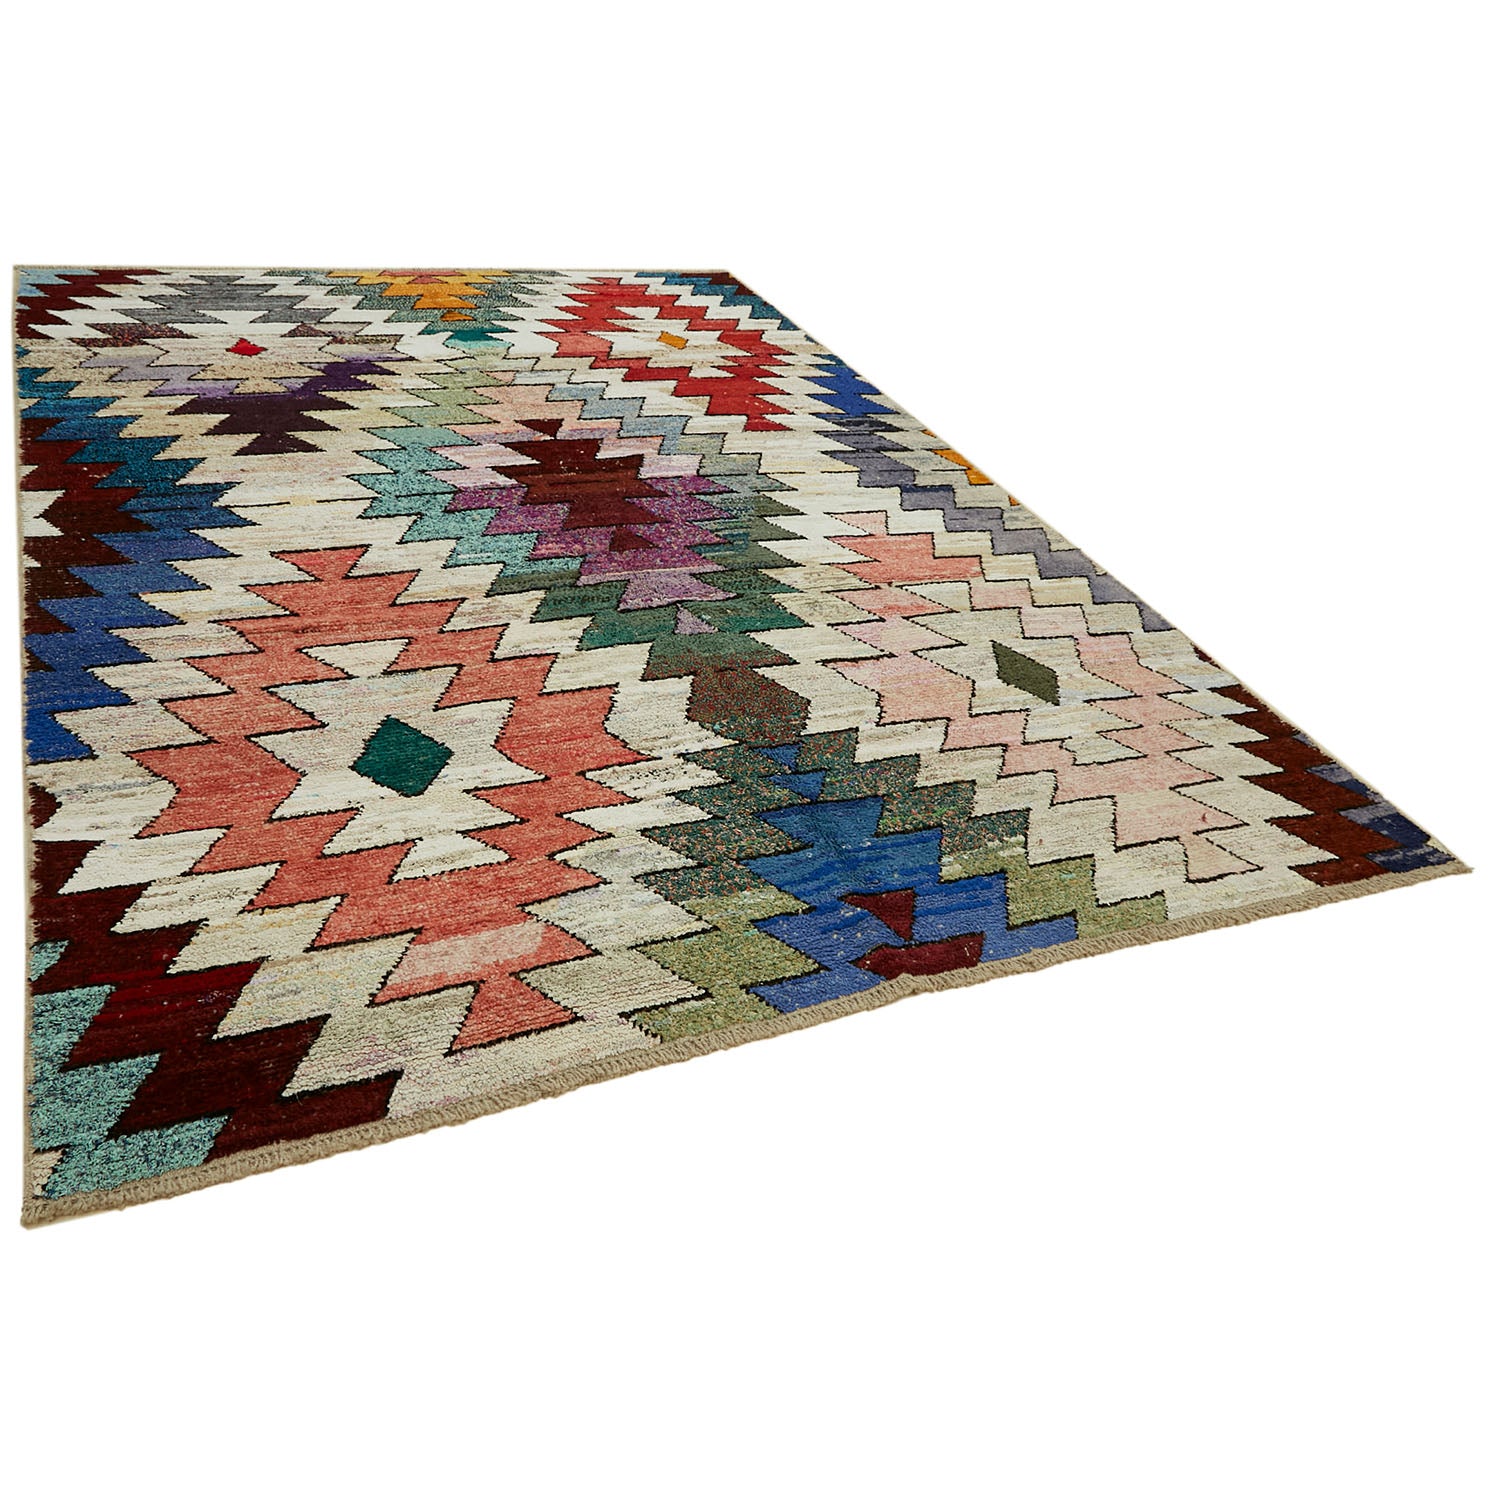 Vibrant and symmetrical artisanal rug with intricate geometric pattern.